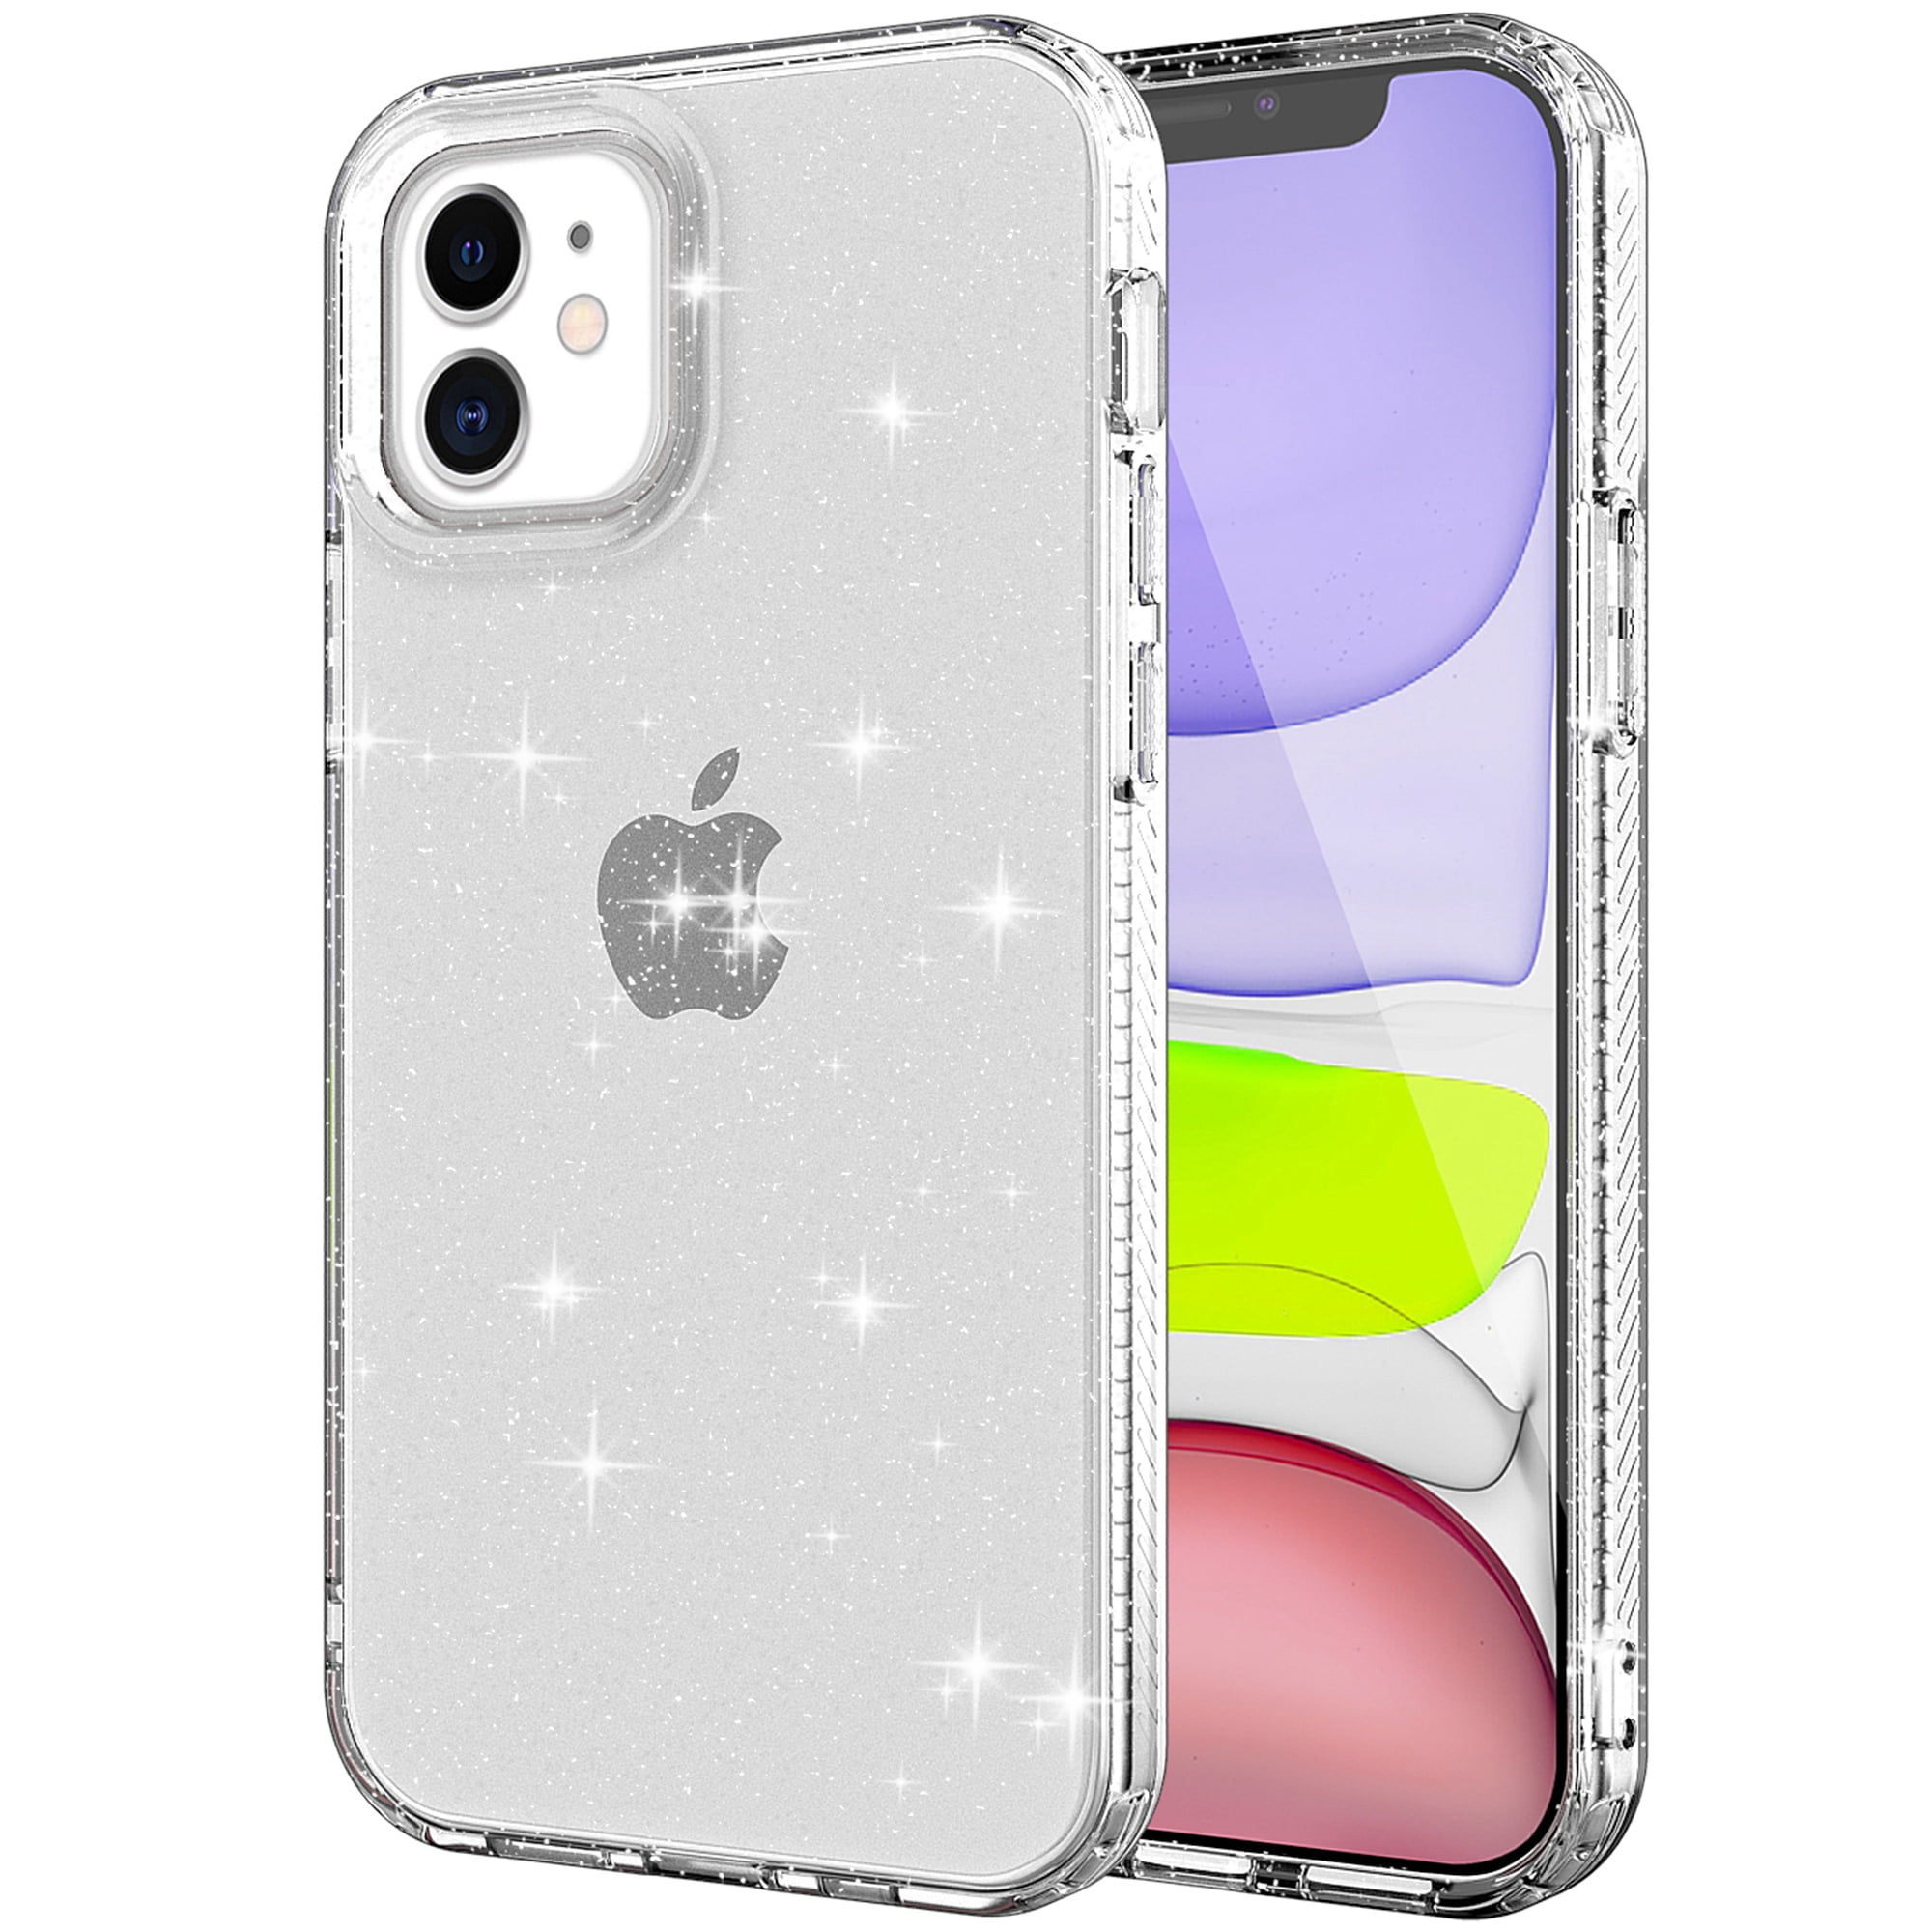 Crystal Soft Bling Glitter Sparkle Gel Compatible with iPhone 11,TPU Silicone Bumper Ultra Thin Slim Rubber Clear Transparent Flower Cartoon Pattern Flexible Protective Back Cover 